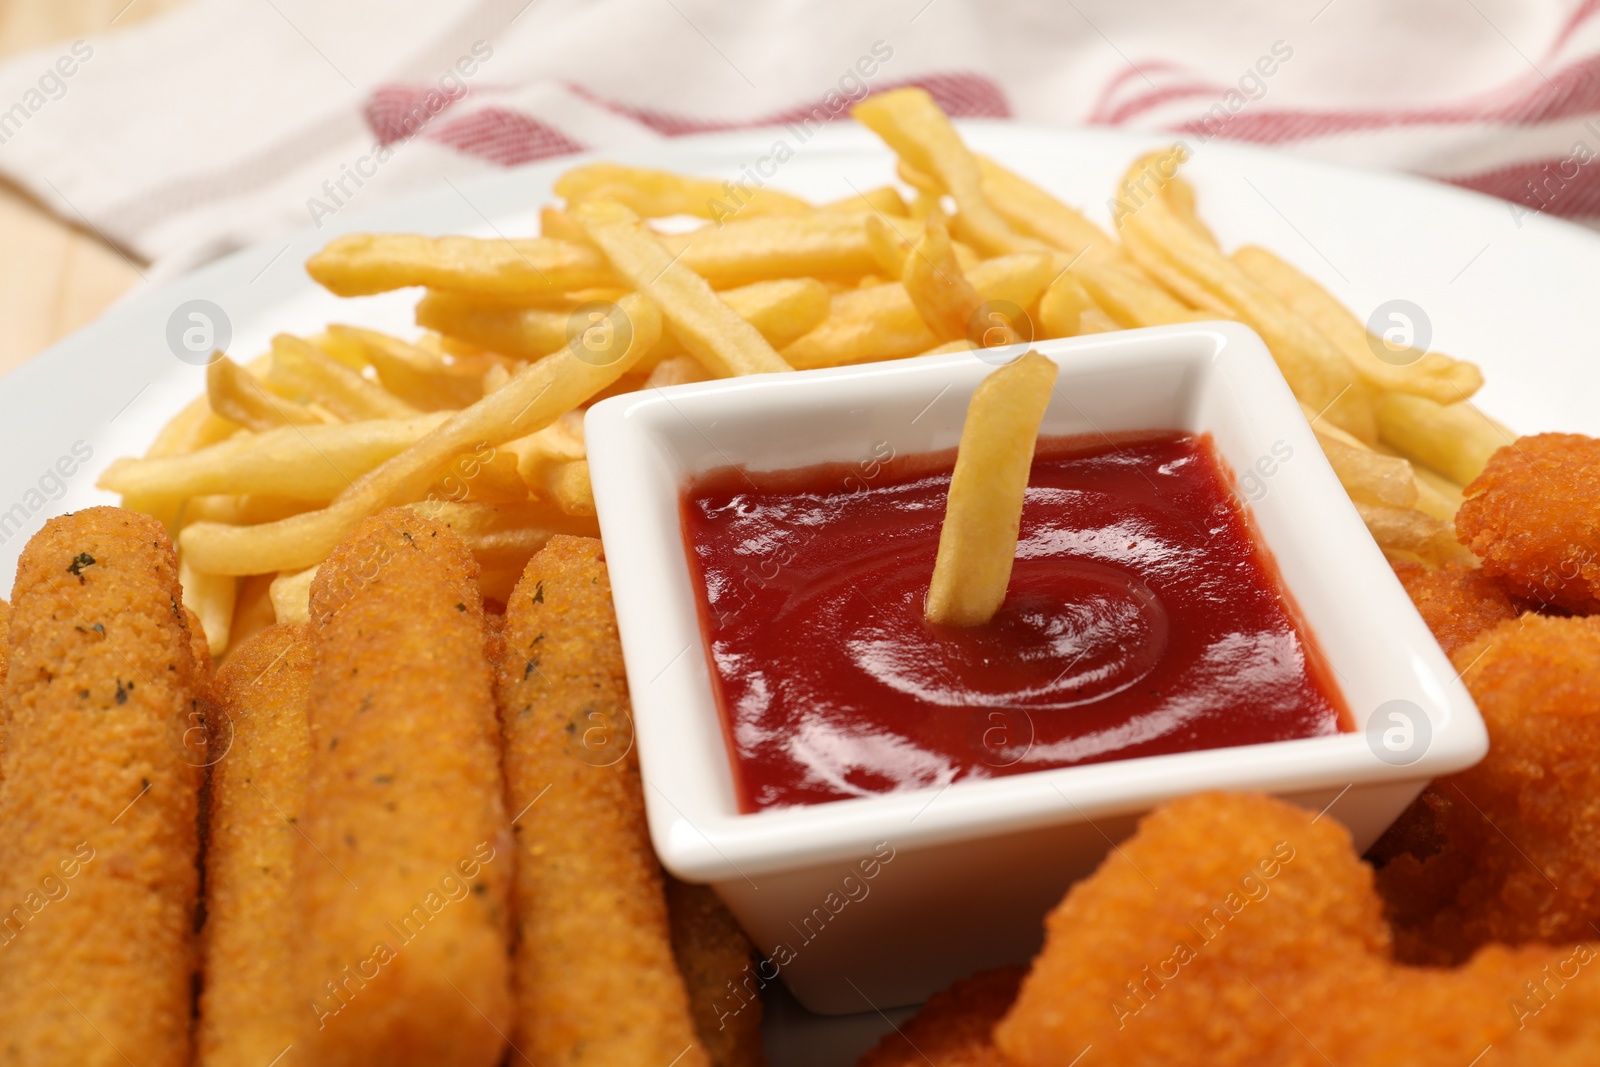 Photo of Tasty ketchup, fries and cheese sticks on plate, closeup